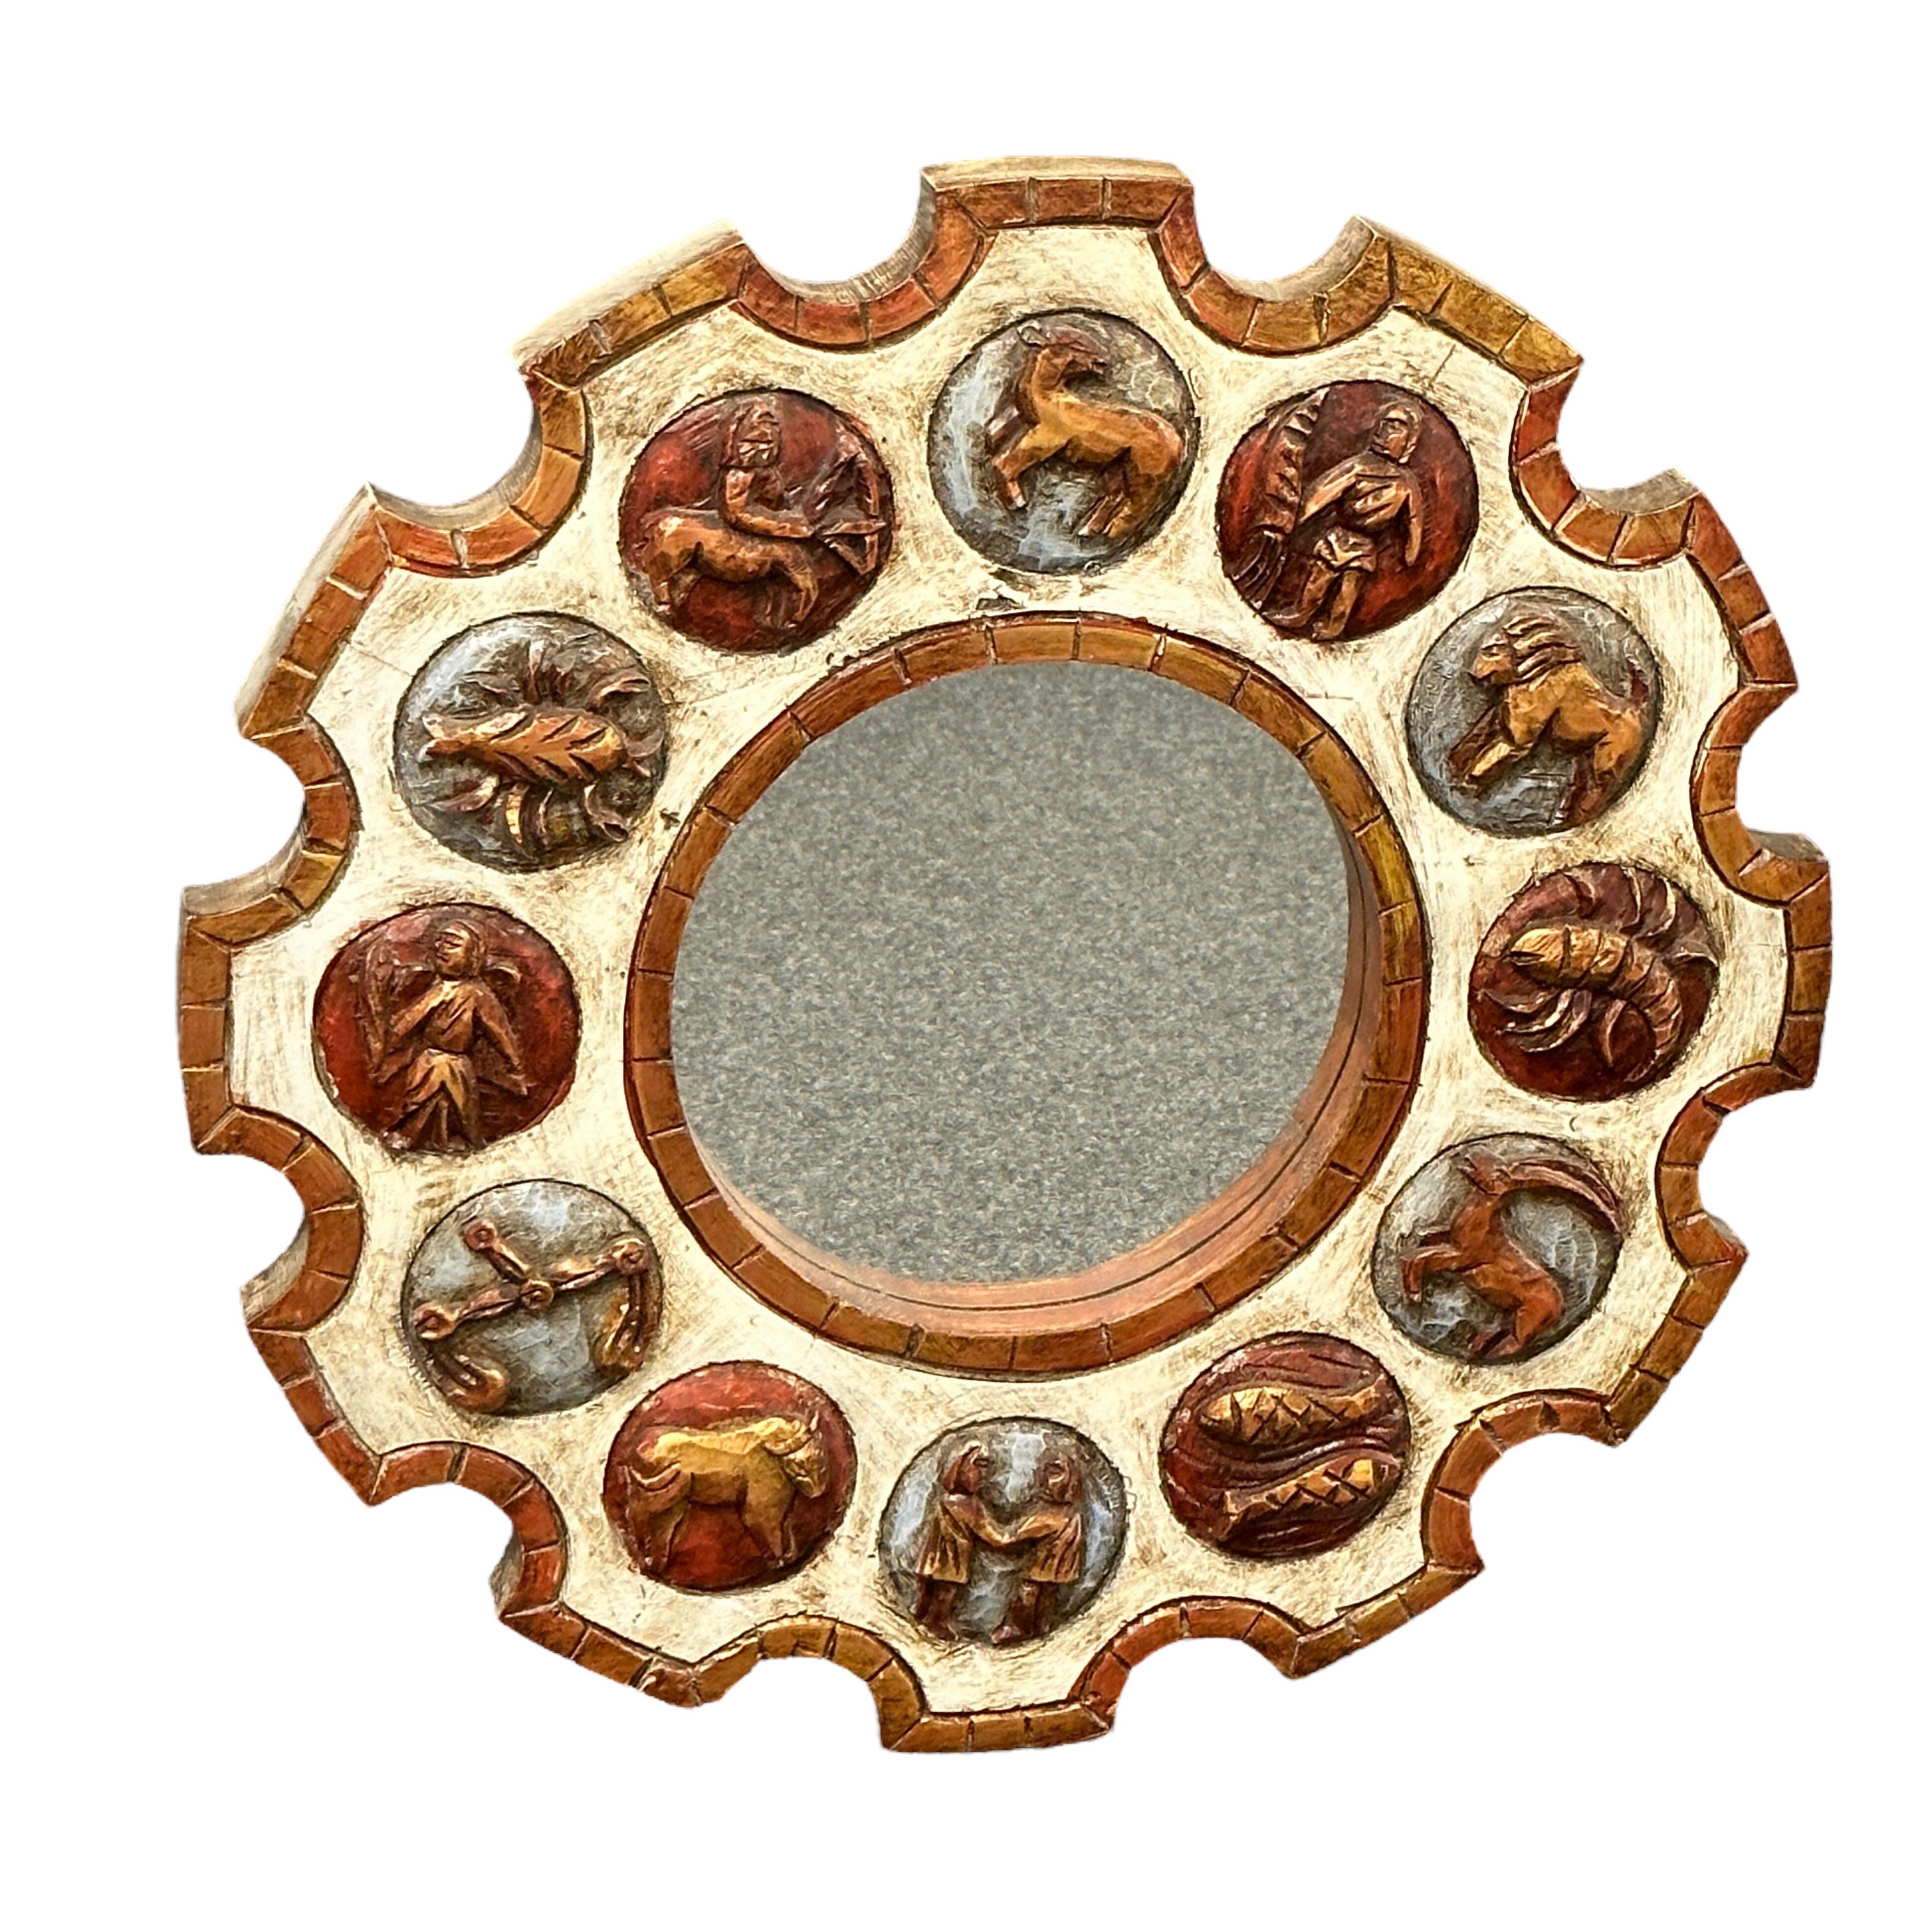 A beautiful Zodiac sunburst mirror in Carved Wood, Germany, 1970s. Brutalist Style Horoscope mirror with colored wheel frame and 12 signs of zodiac. Terrific zodiac signs on a brown cream white frame. Eye-catching contrast of the cream white frame